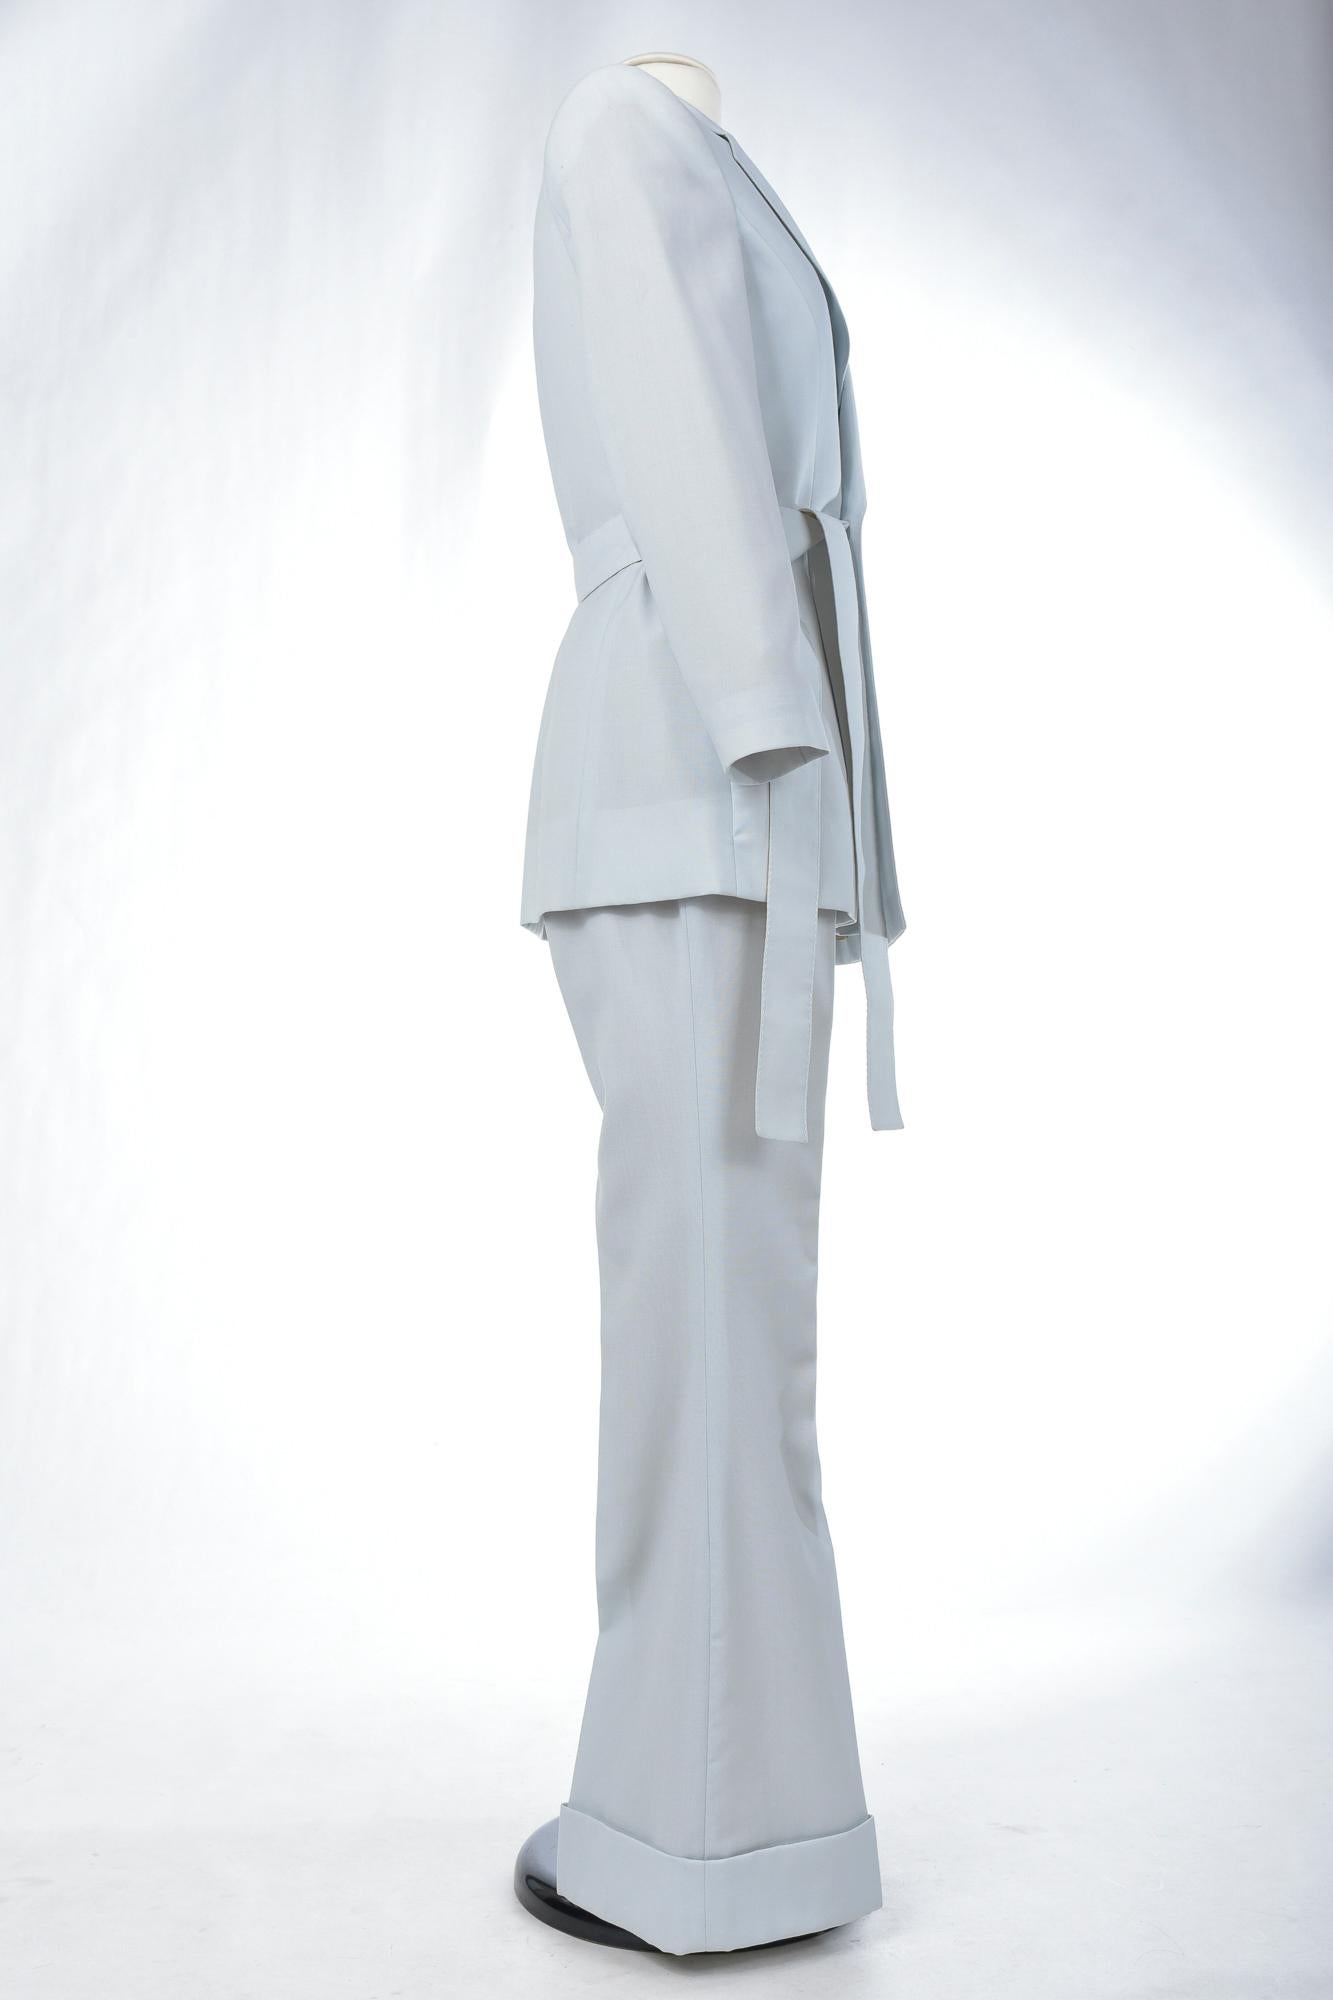 An Ice blue Tuxedo Pant Suit by Gianfranco Ferre - Italy Circa 1995 - 2000 For Sale 6